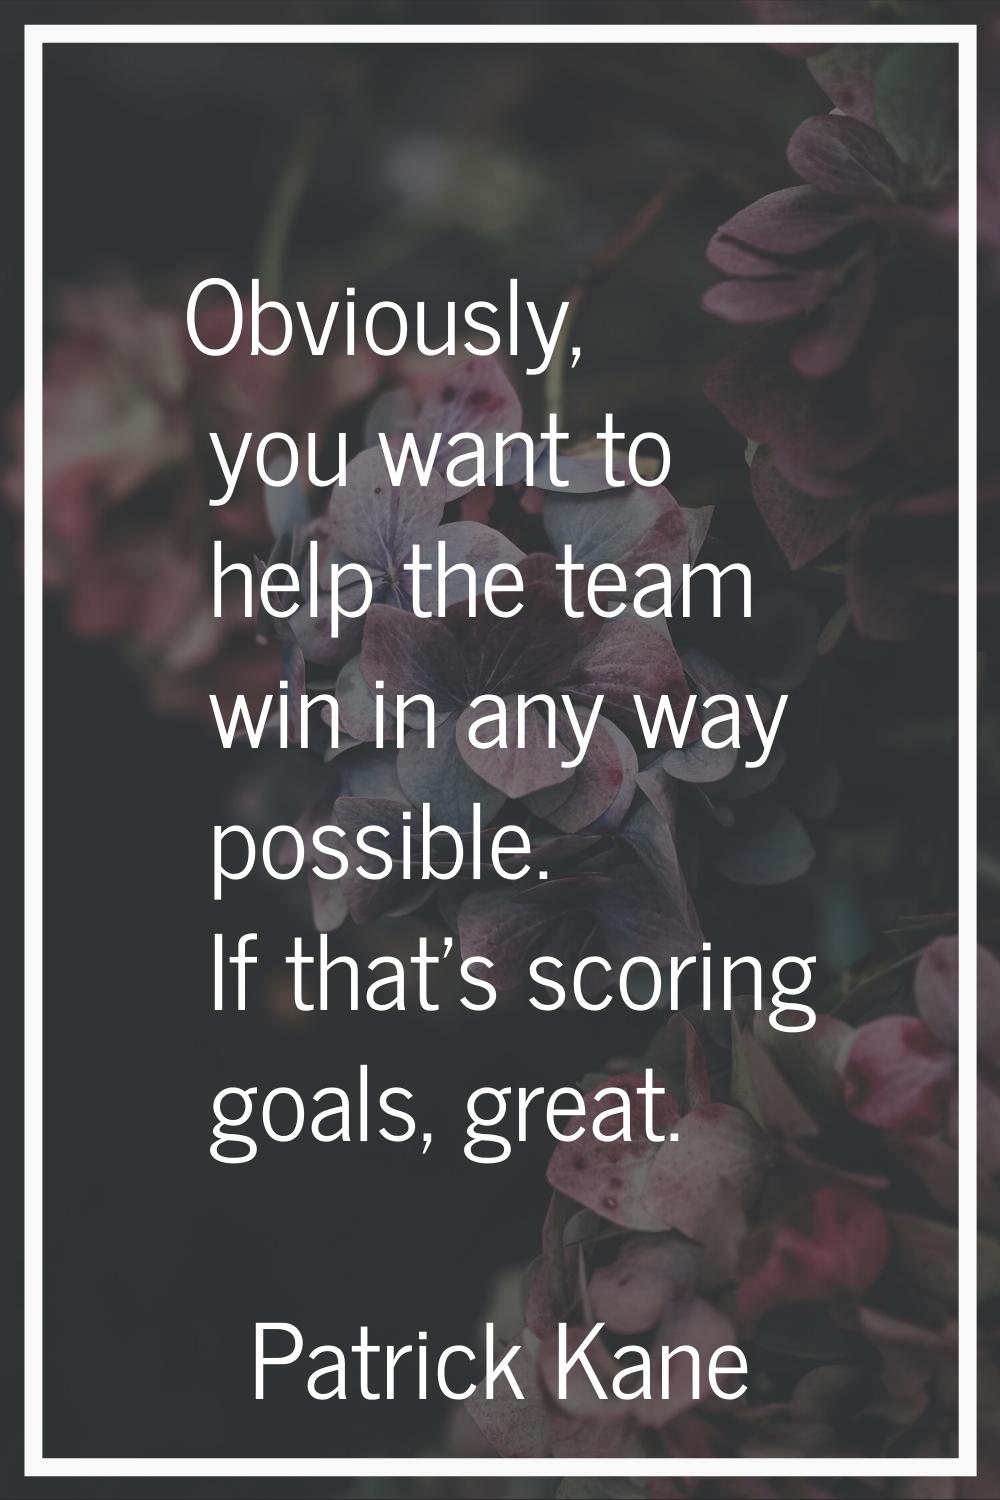 Obviously, you want to help the team win in any way possible. If that's scoring goals, great.